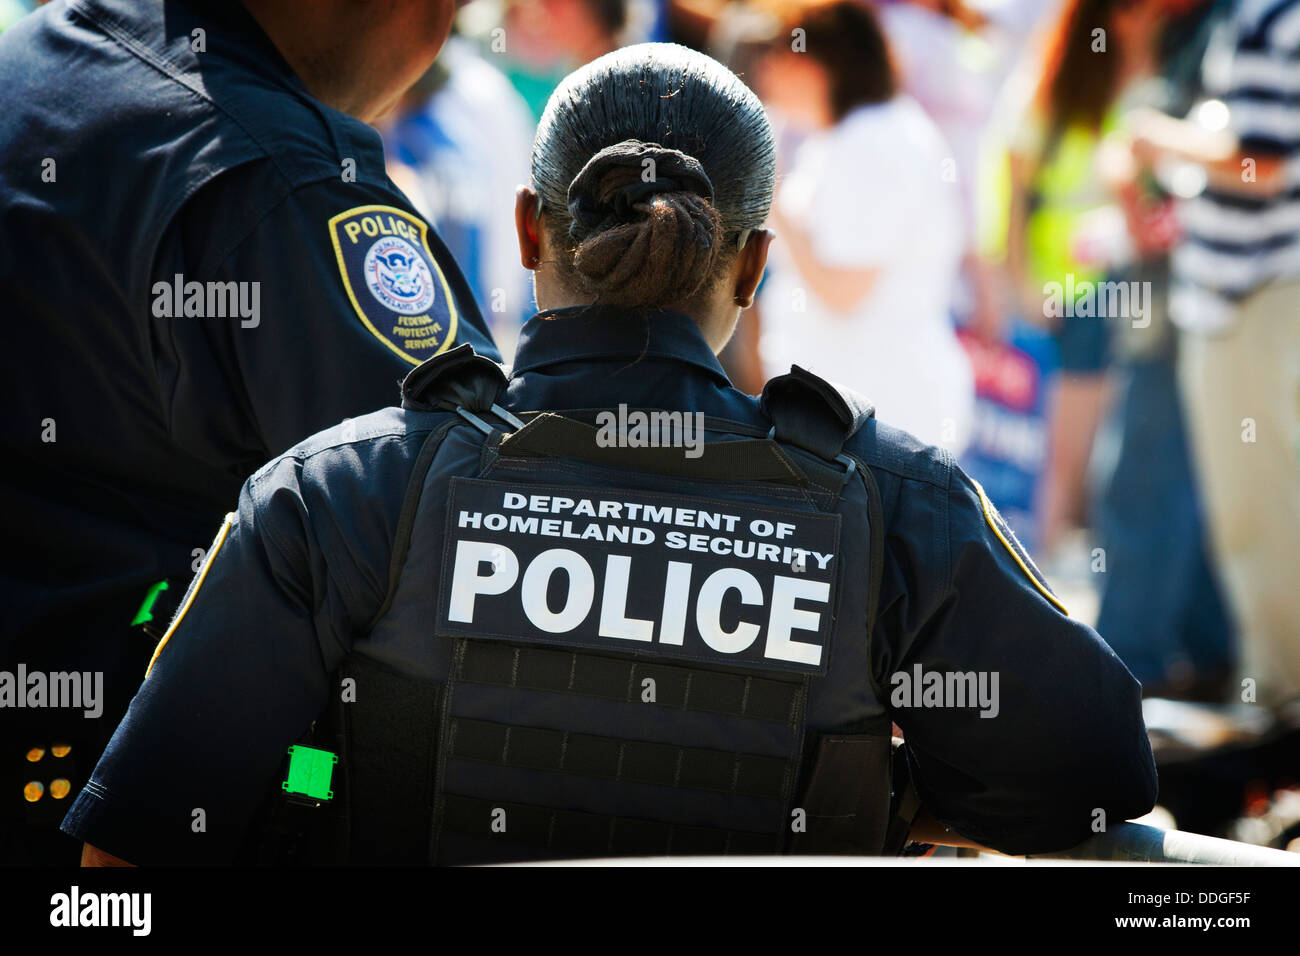 Homeland Security On Guard Stock Photo